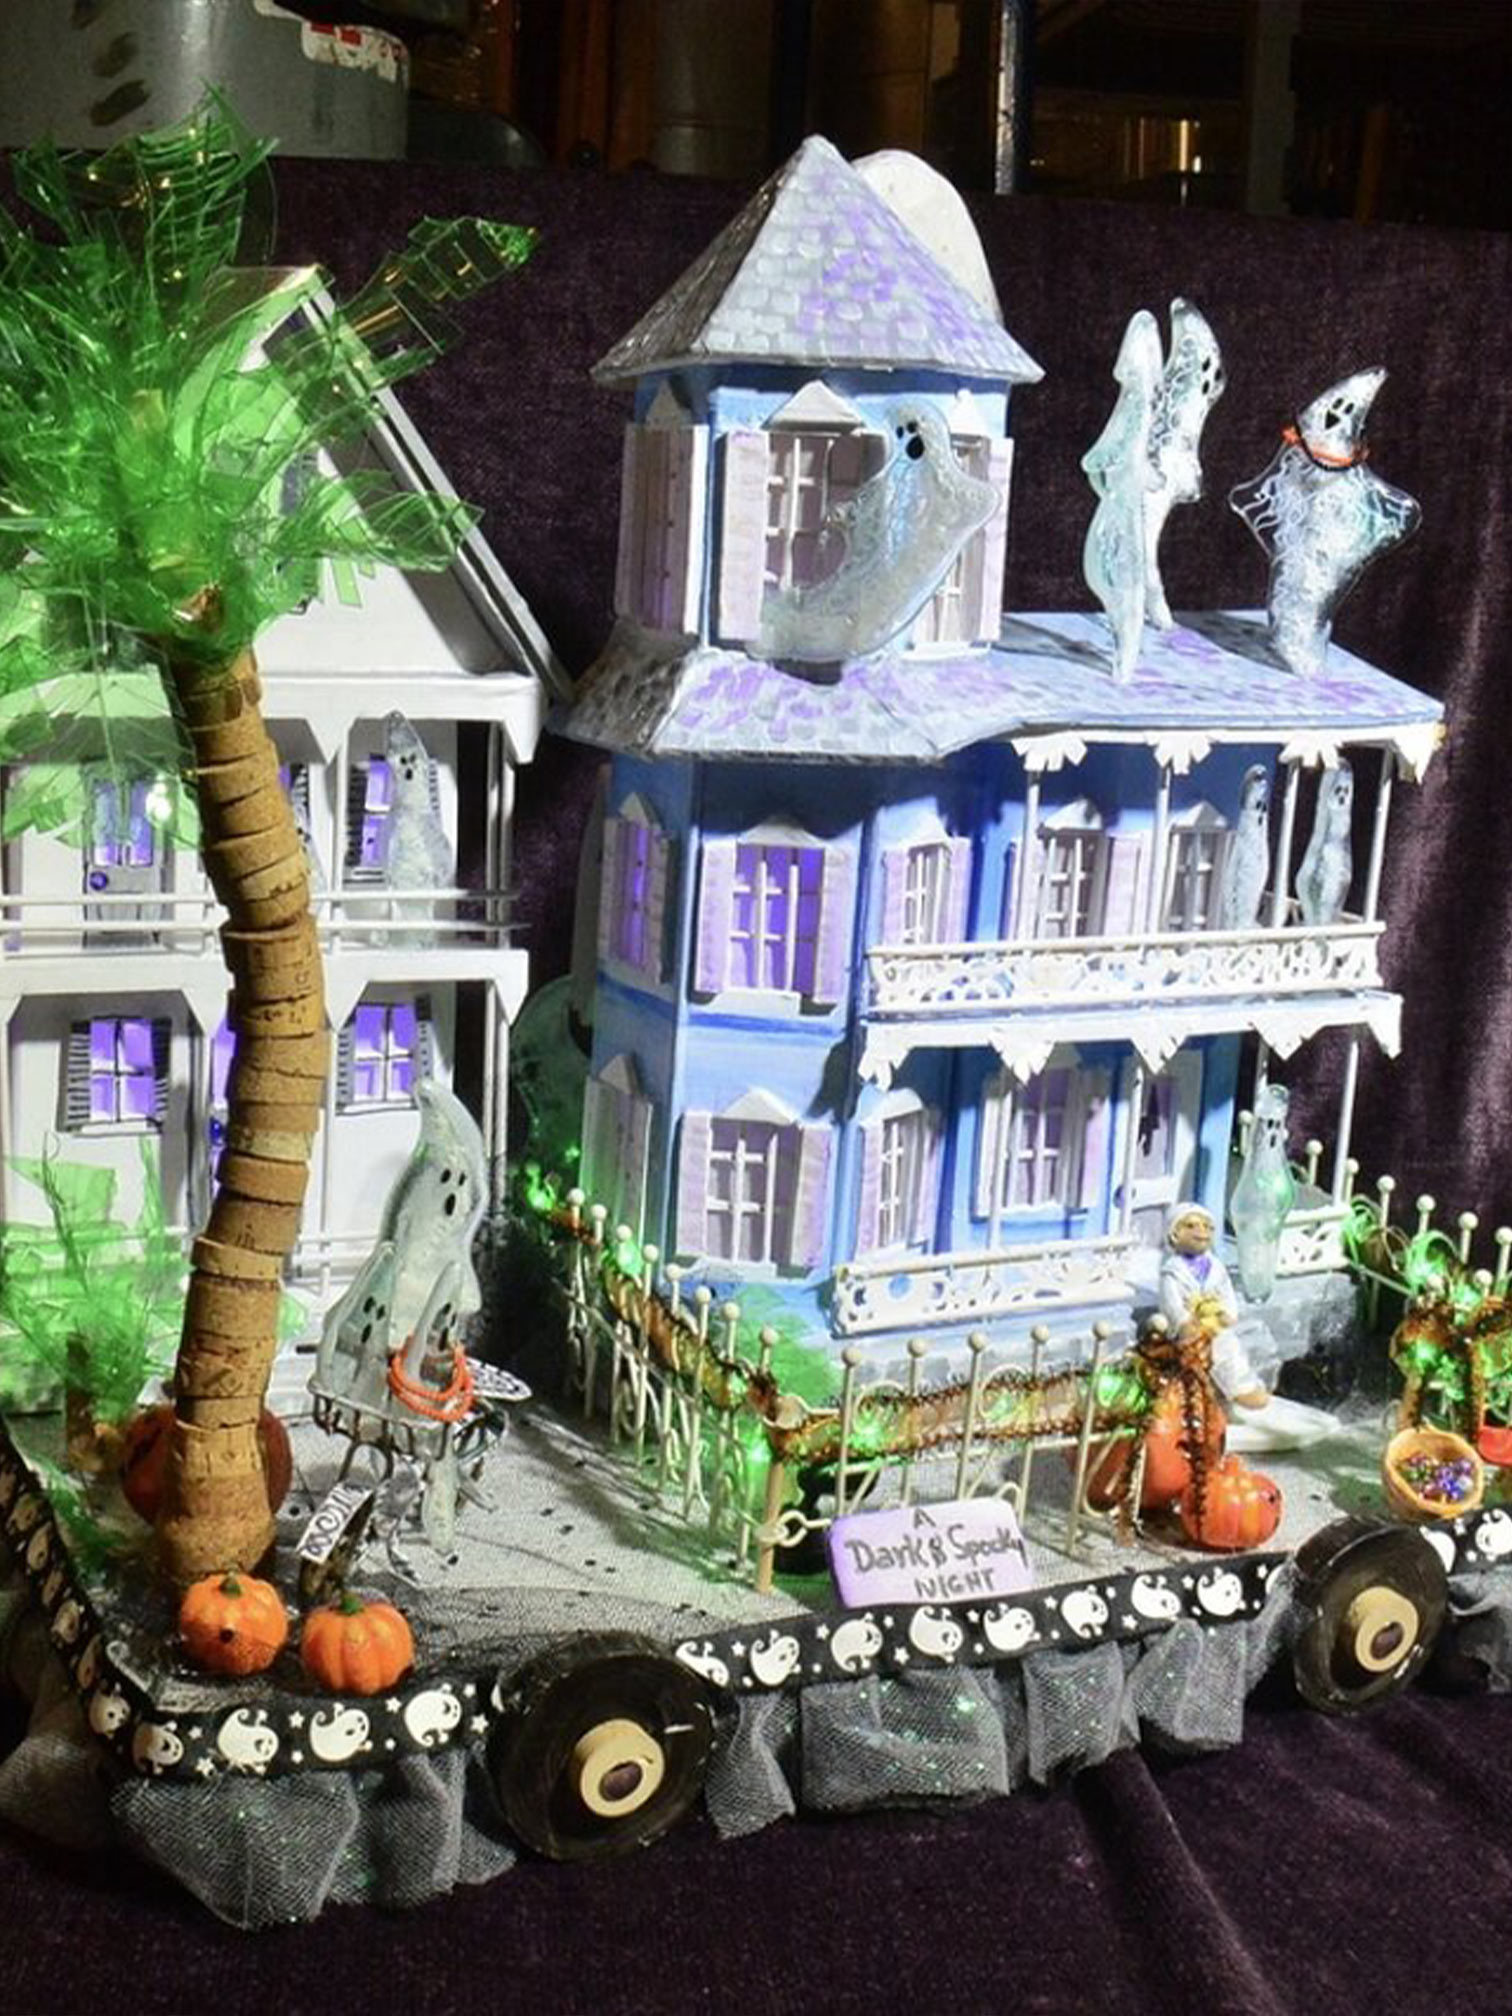 color photo of Smallest Parade "Dark and Spooky Night" float entry house with ghosts